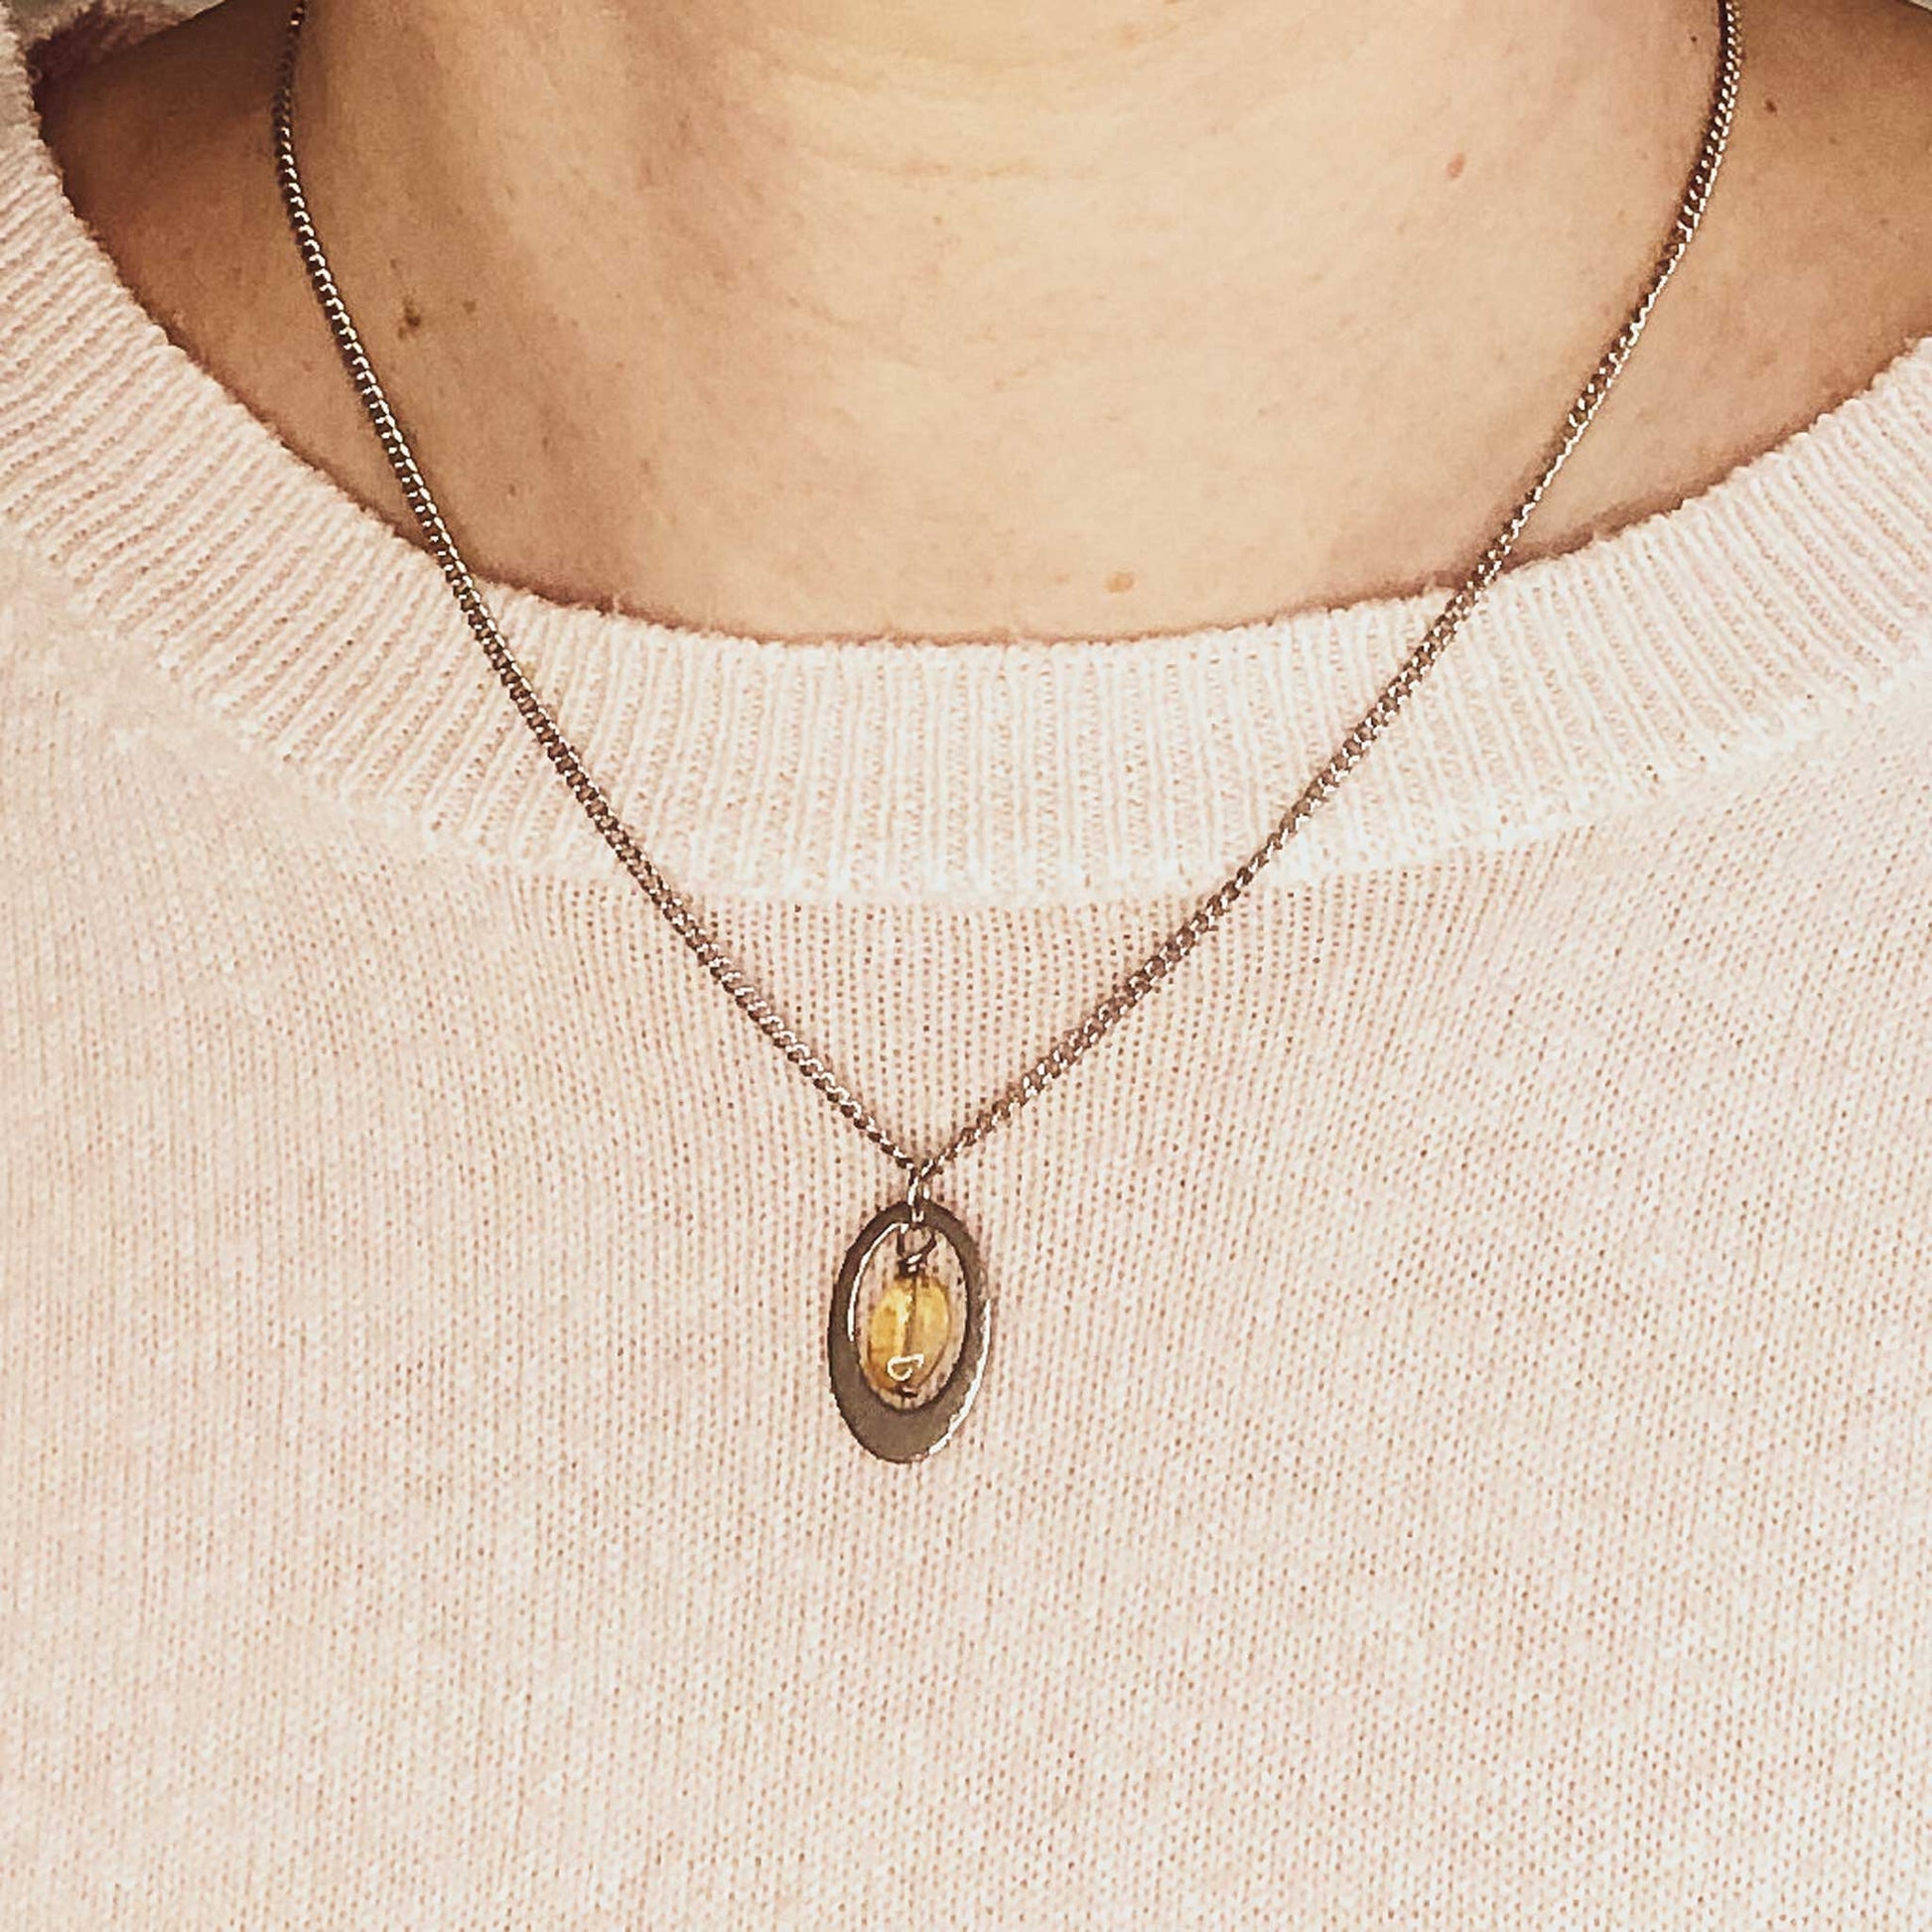 Woman wearing pink jumper and dainty oval Citrine pendant necklace.